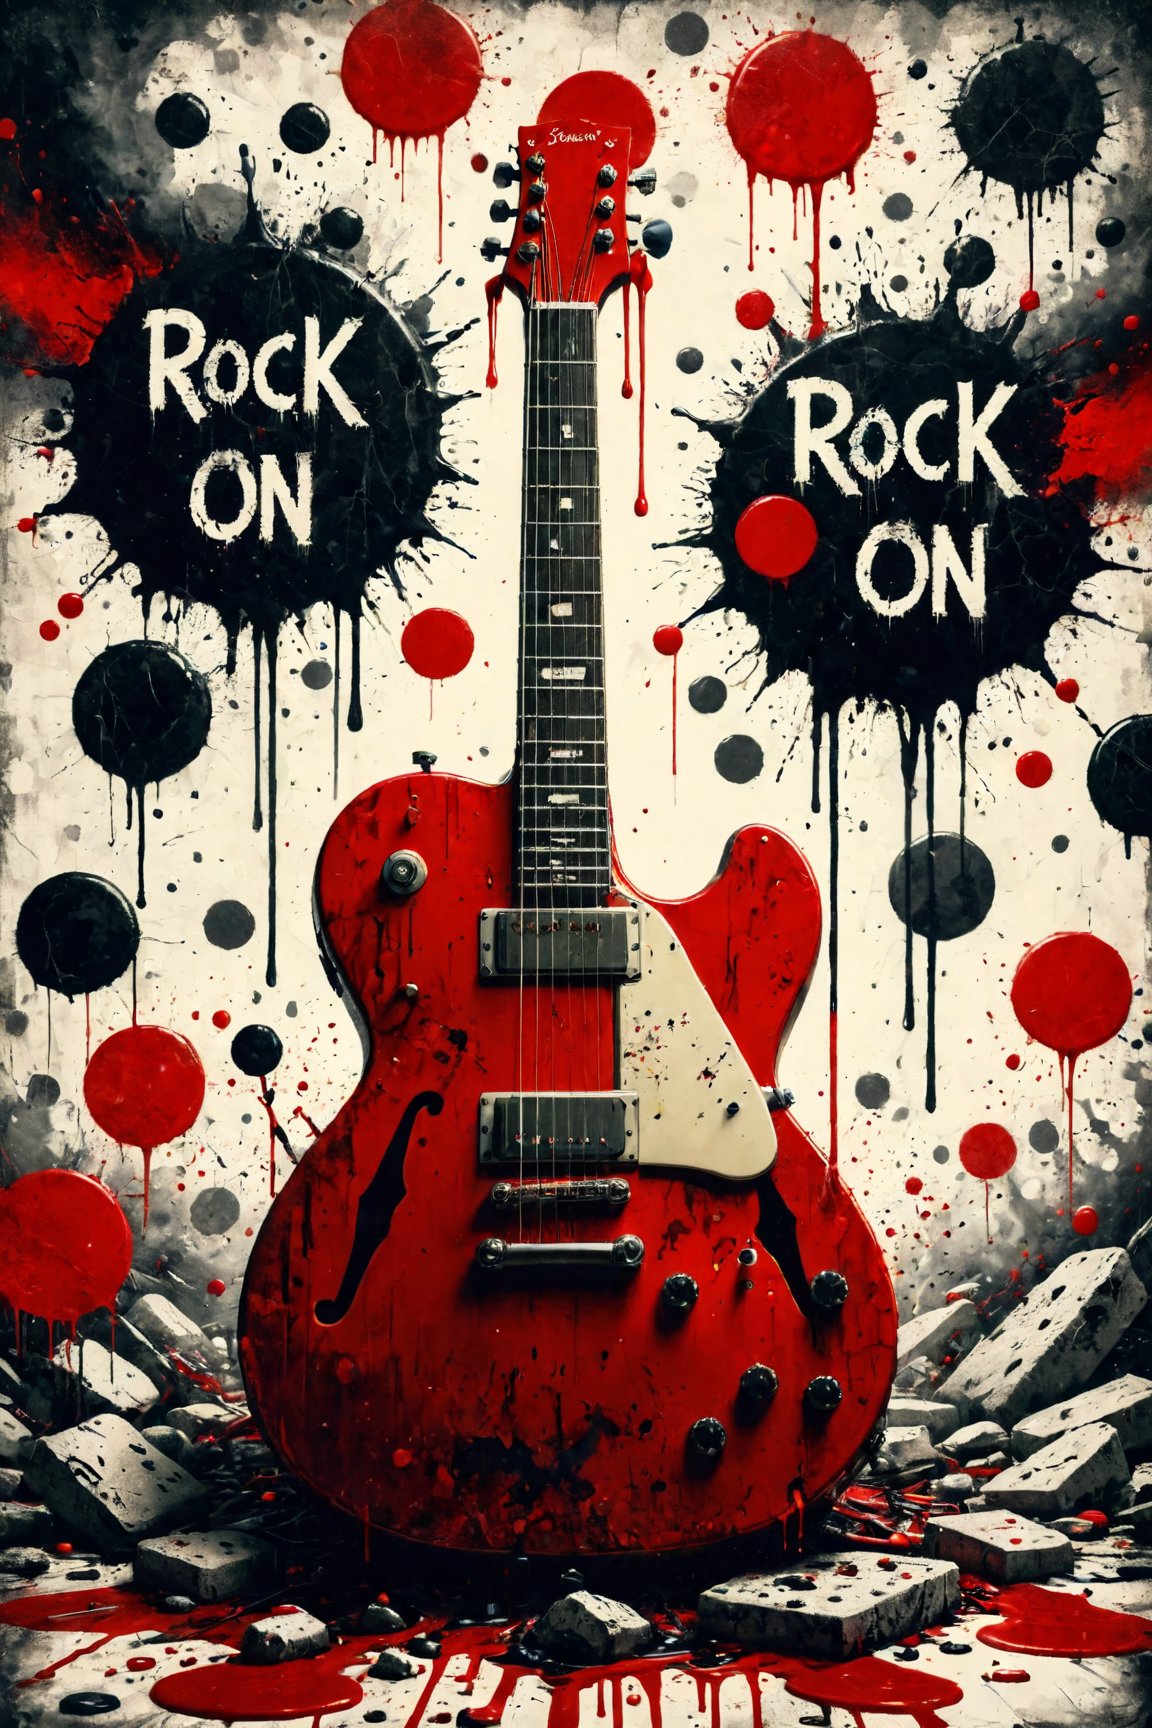 (An amazing and captivating abstract illustration:1.4), english text, text focus, cover, album cover, (red guitar:1.2), black stains, (dripping white paint:1.1), (grunge style:1.4), (colorful and minimalistic:1.3), (2004 aesthetics:1.2),(beautiful vector shapes:1.3), with (the white text "ROCK ON!":1.4), text block. BREAK (red background:1.3), (red theme:1.1), sharp details. BREAK highest quality, detailed and intricate, original artwork, trendy, no humans, vintage, award-winning, artint, SFW,PoP art,japanese art,Ukiyo-e